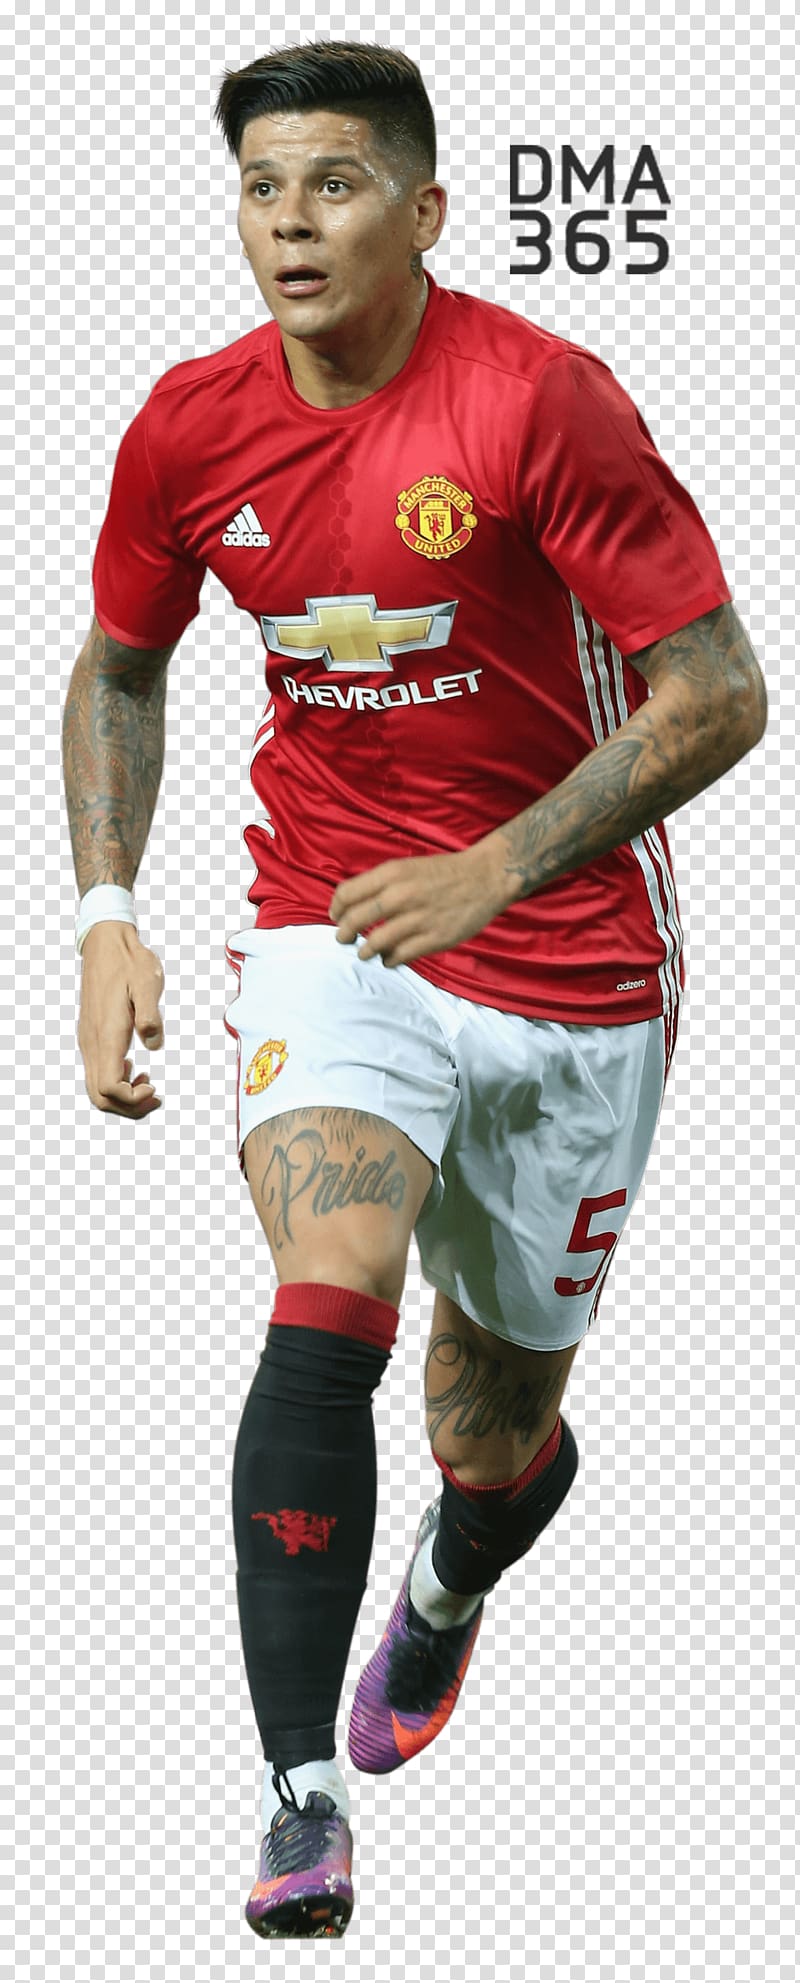 Marcos Rojo Manchester United F.C. Argentina national football team Jersey Football player, Marcos Rojo transparent background PNG clipart